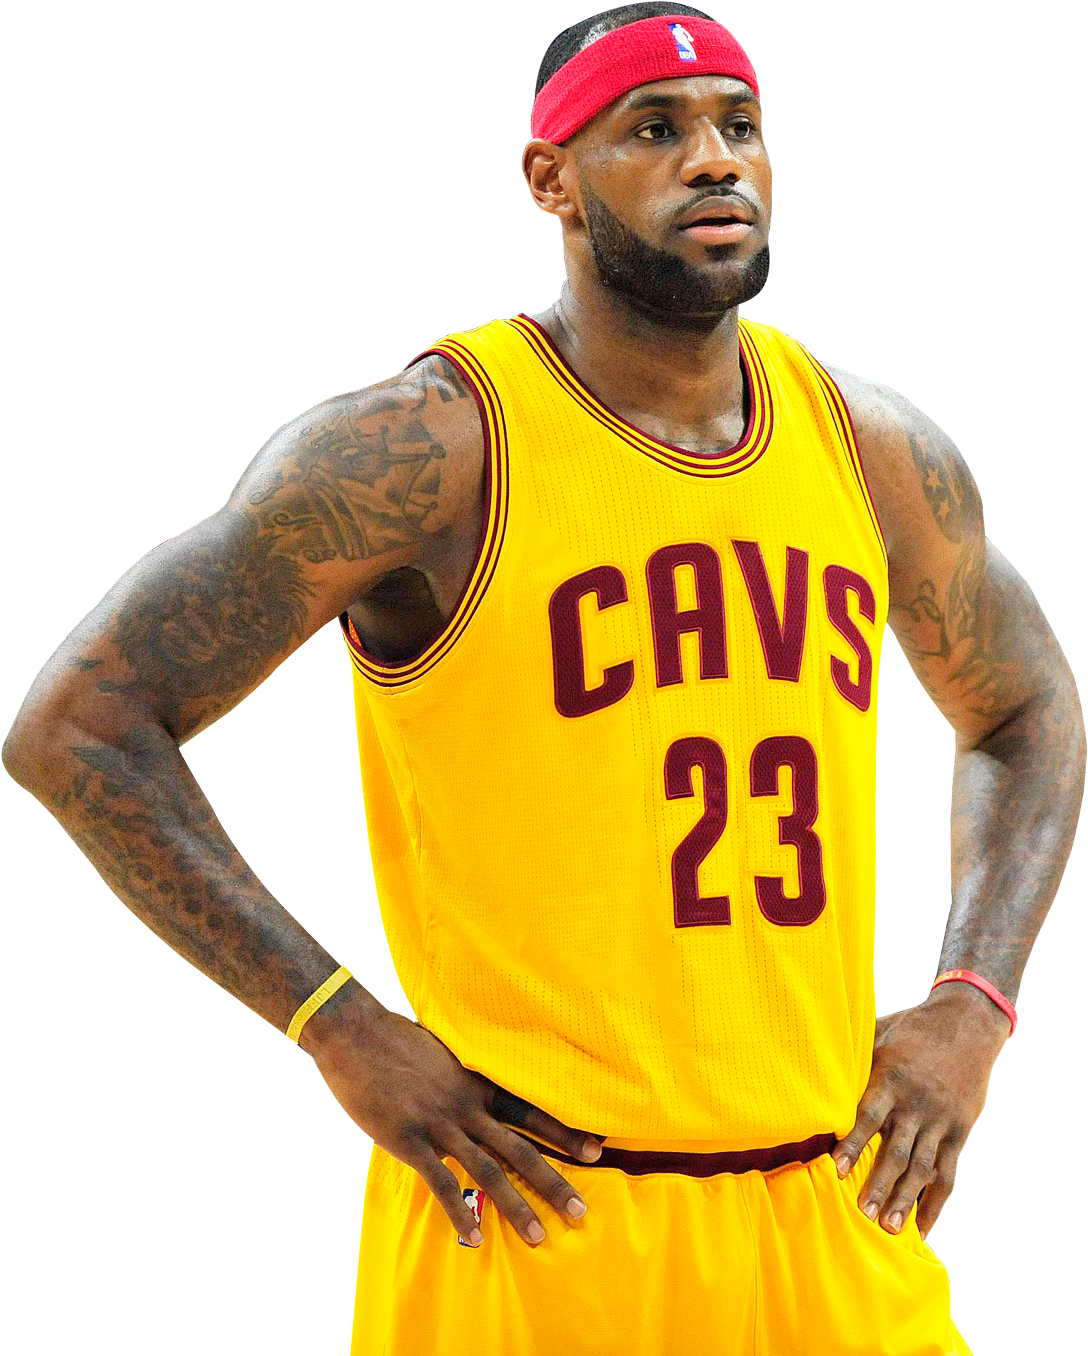 [100+] Lebron Png Images | Wallpapers.com